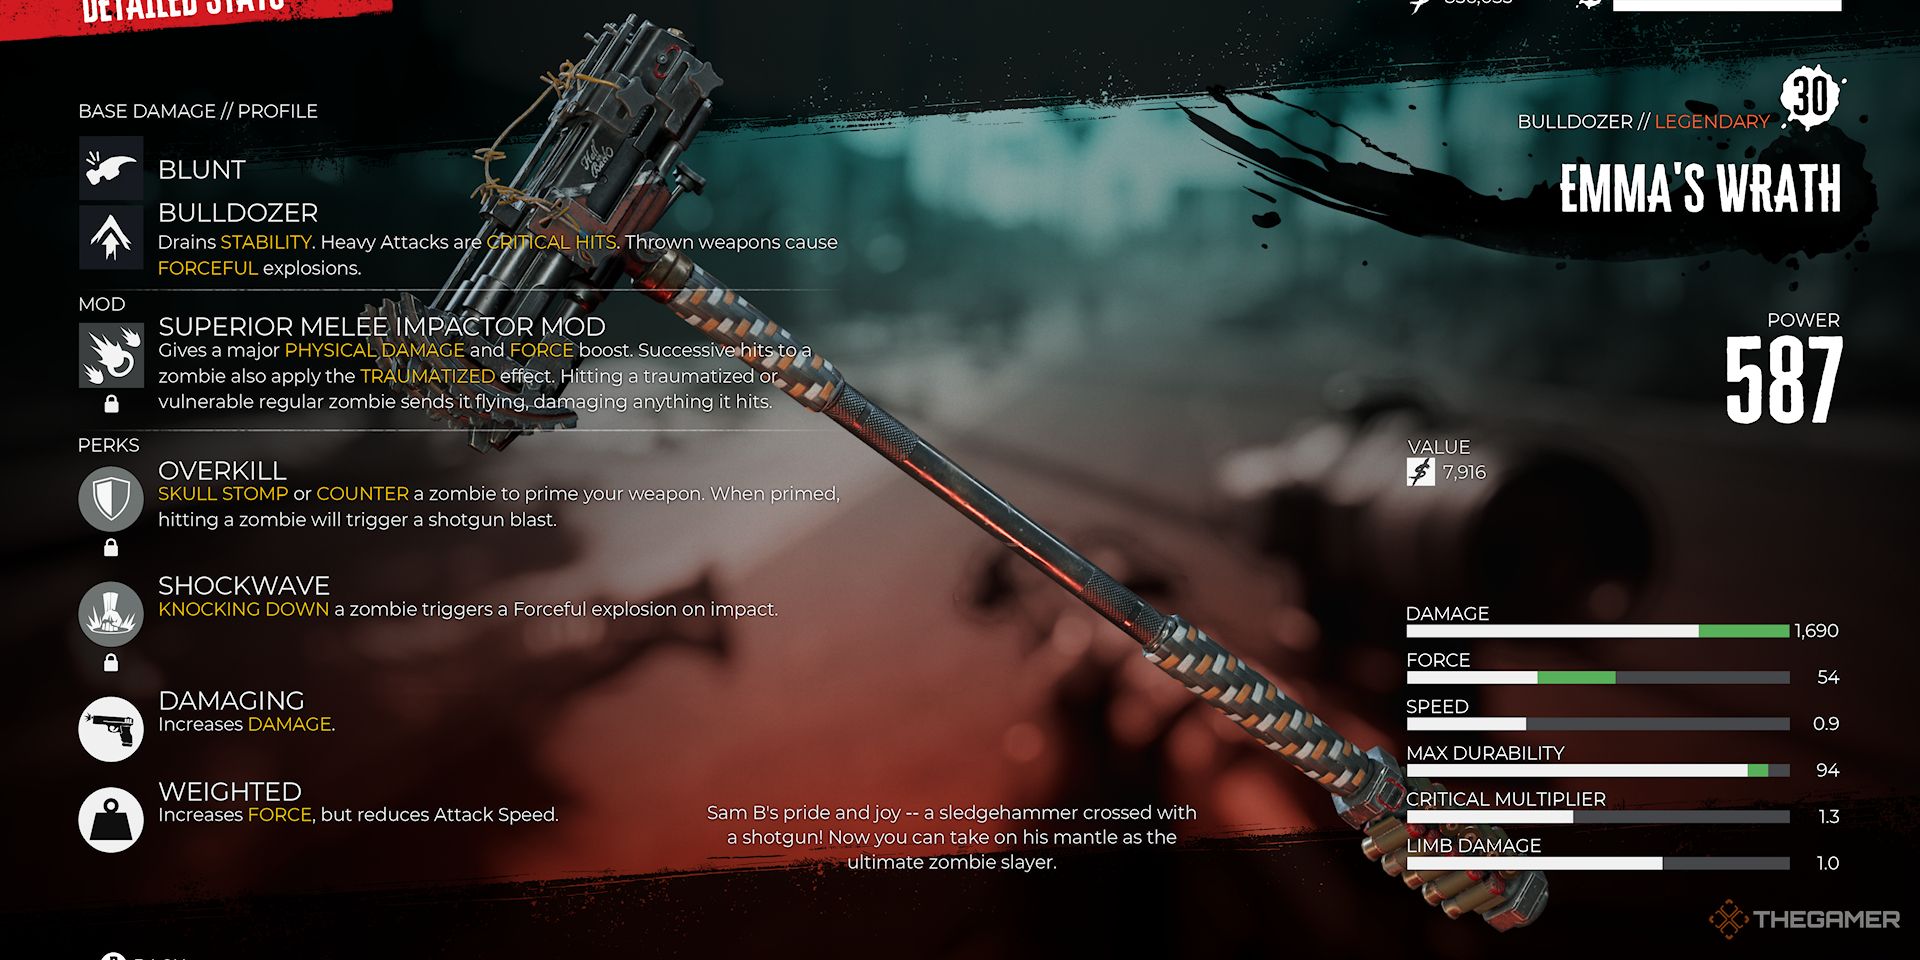 Image shows a modified weapon details and stats screen.